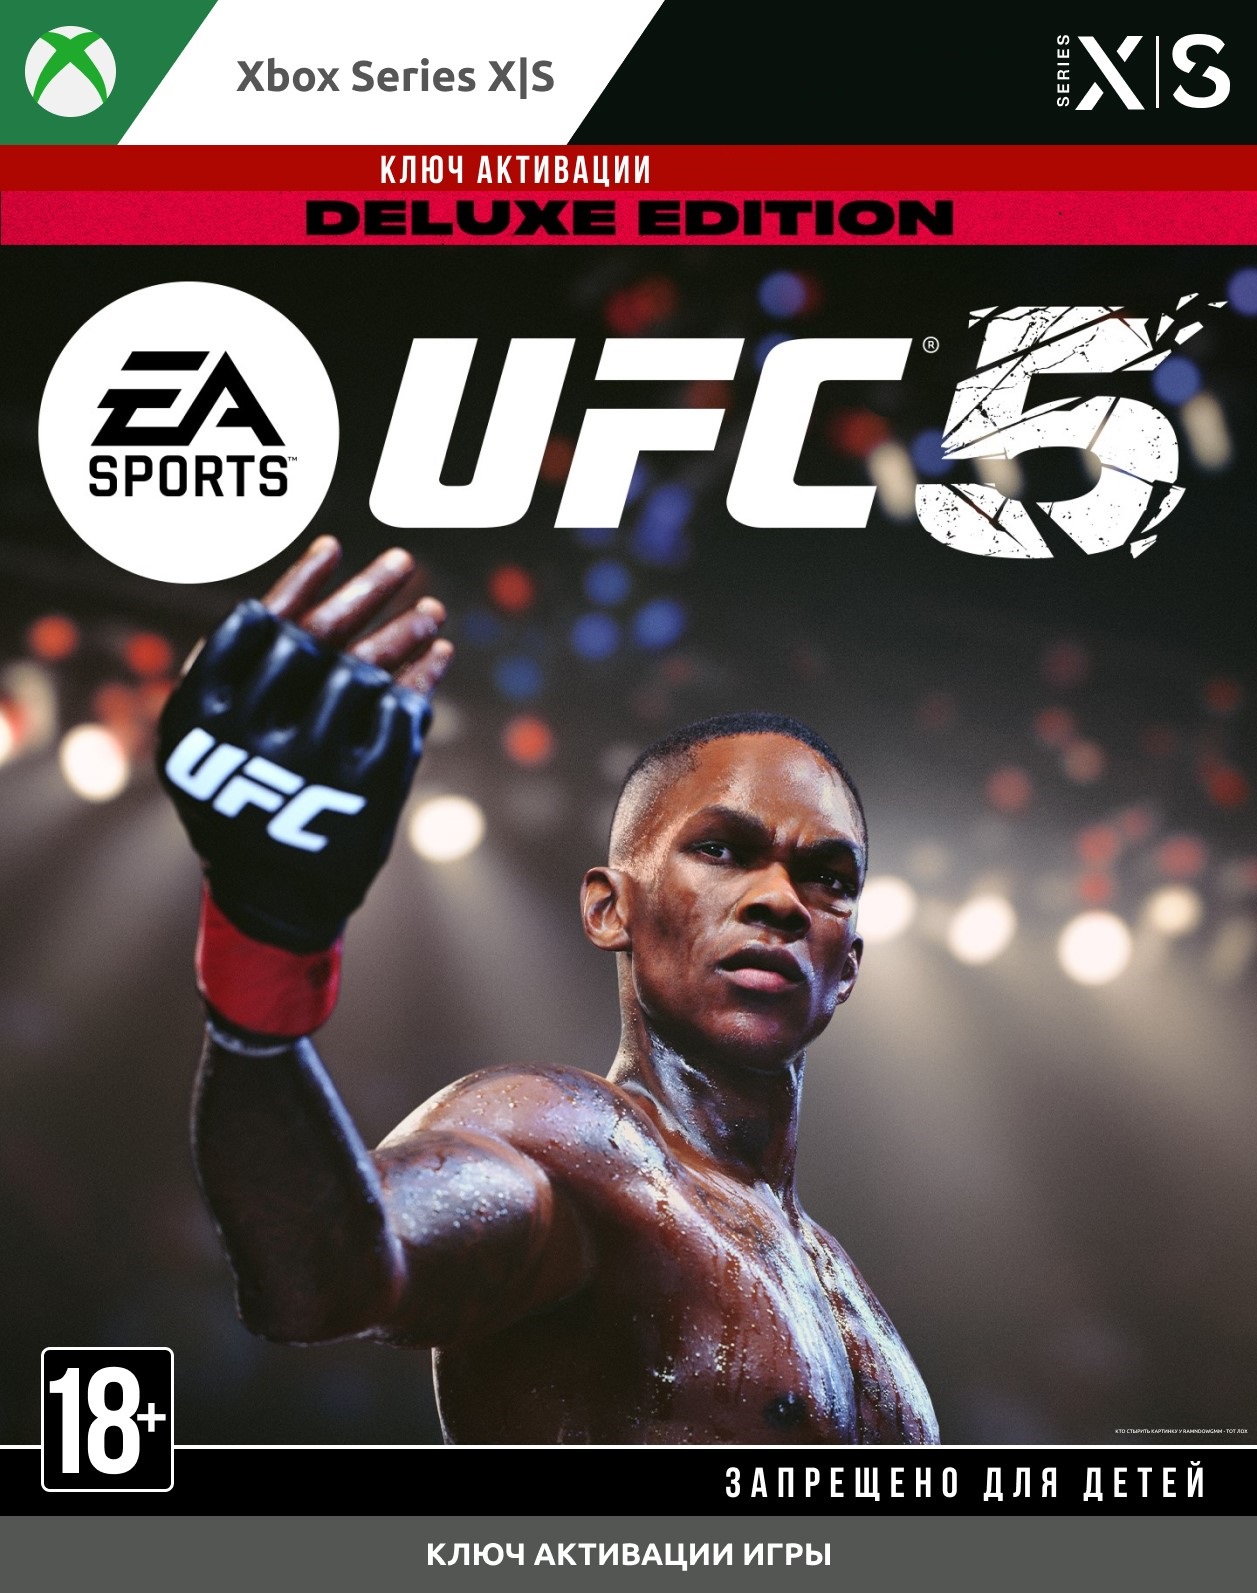 Buy UFC 5 Deluxe Edition XBOX SERIES X|S Digital Key 🔑 cheap, choose ...